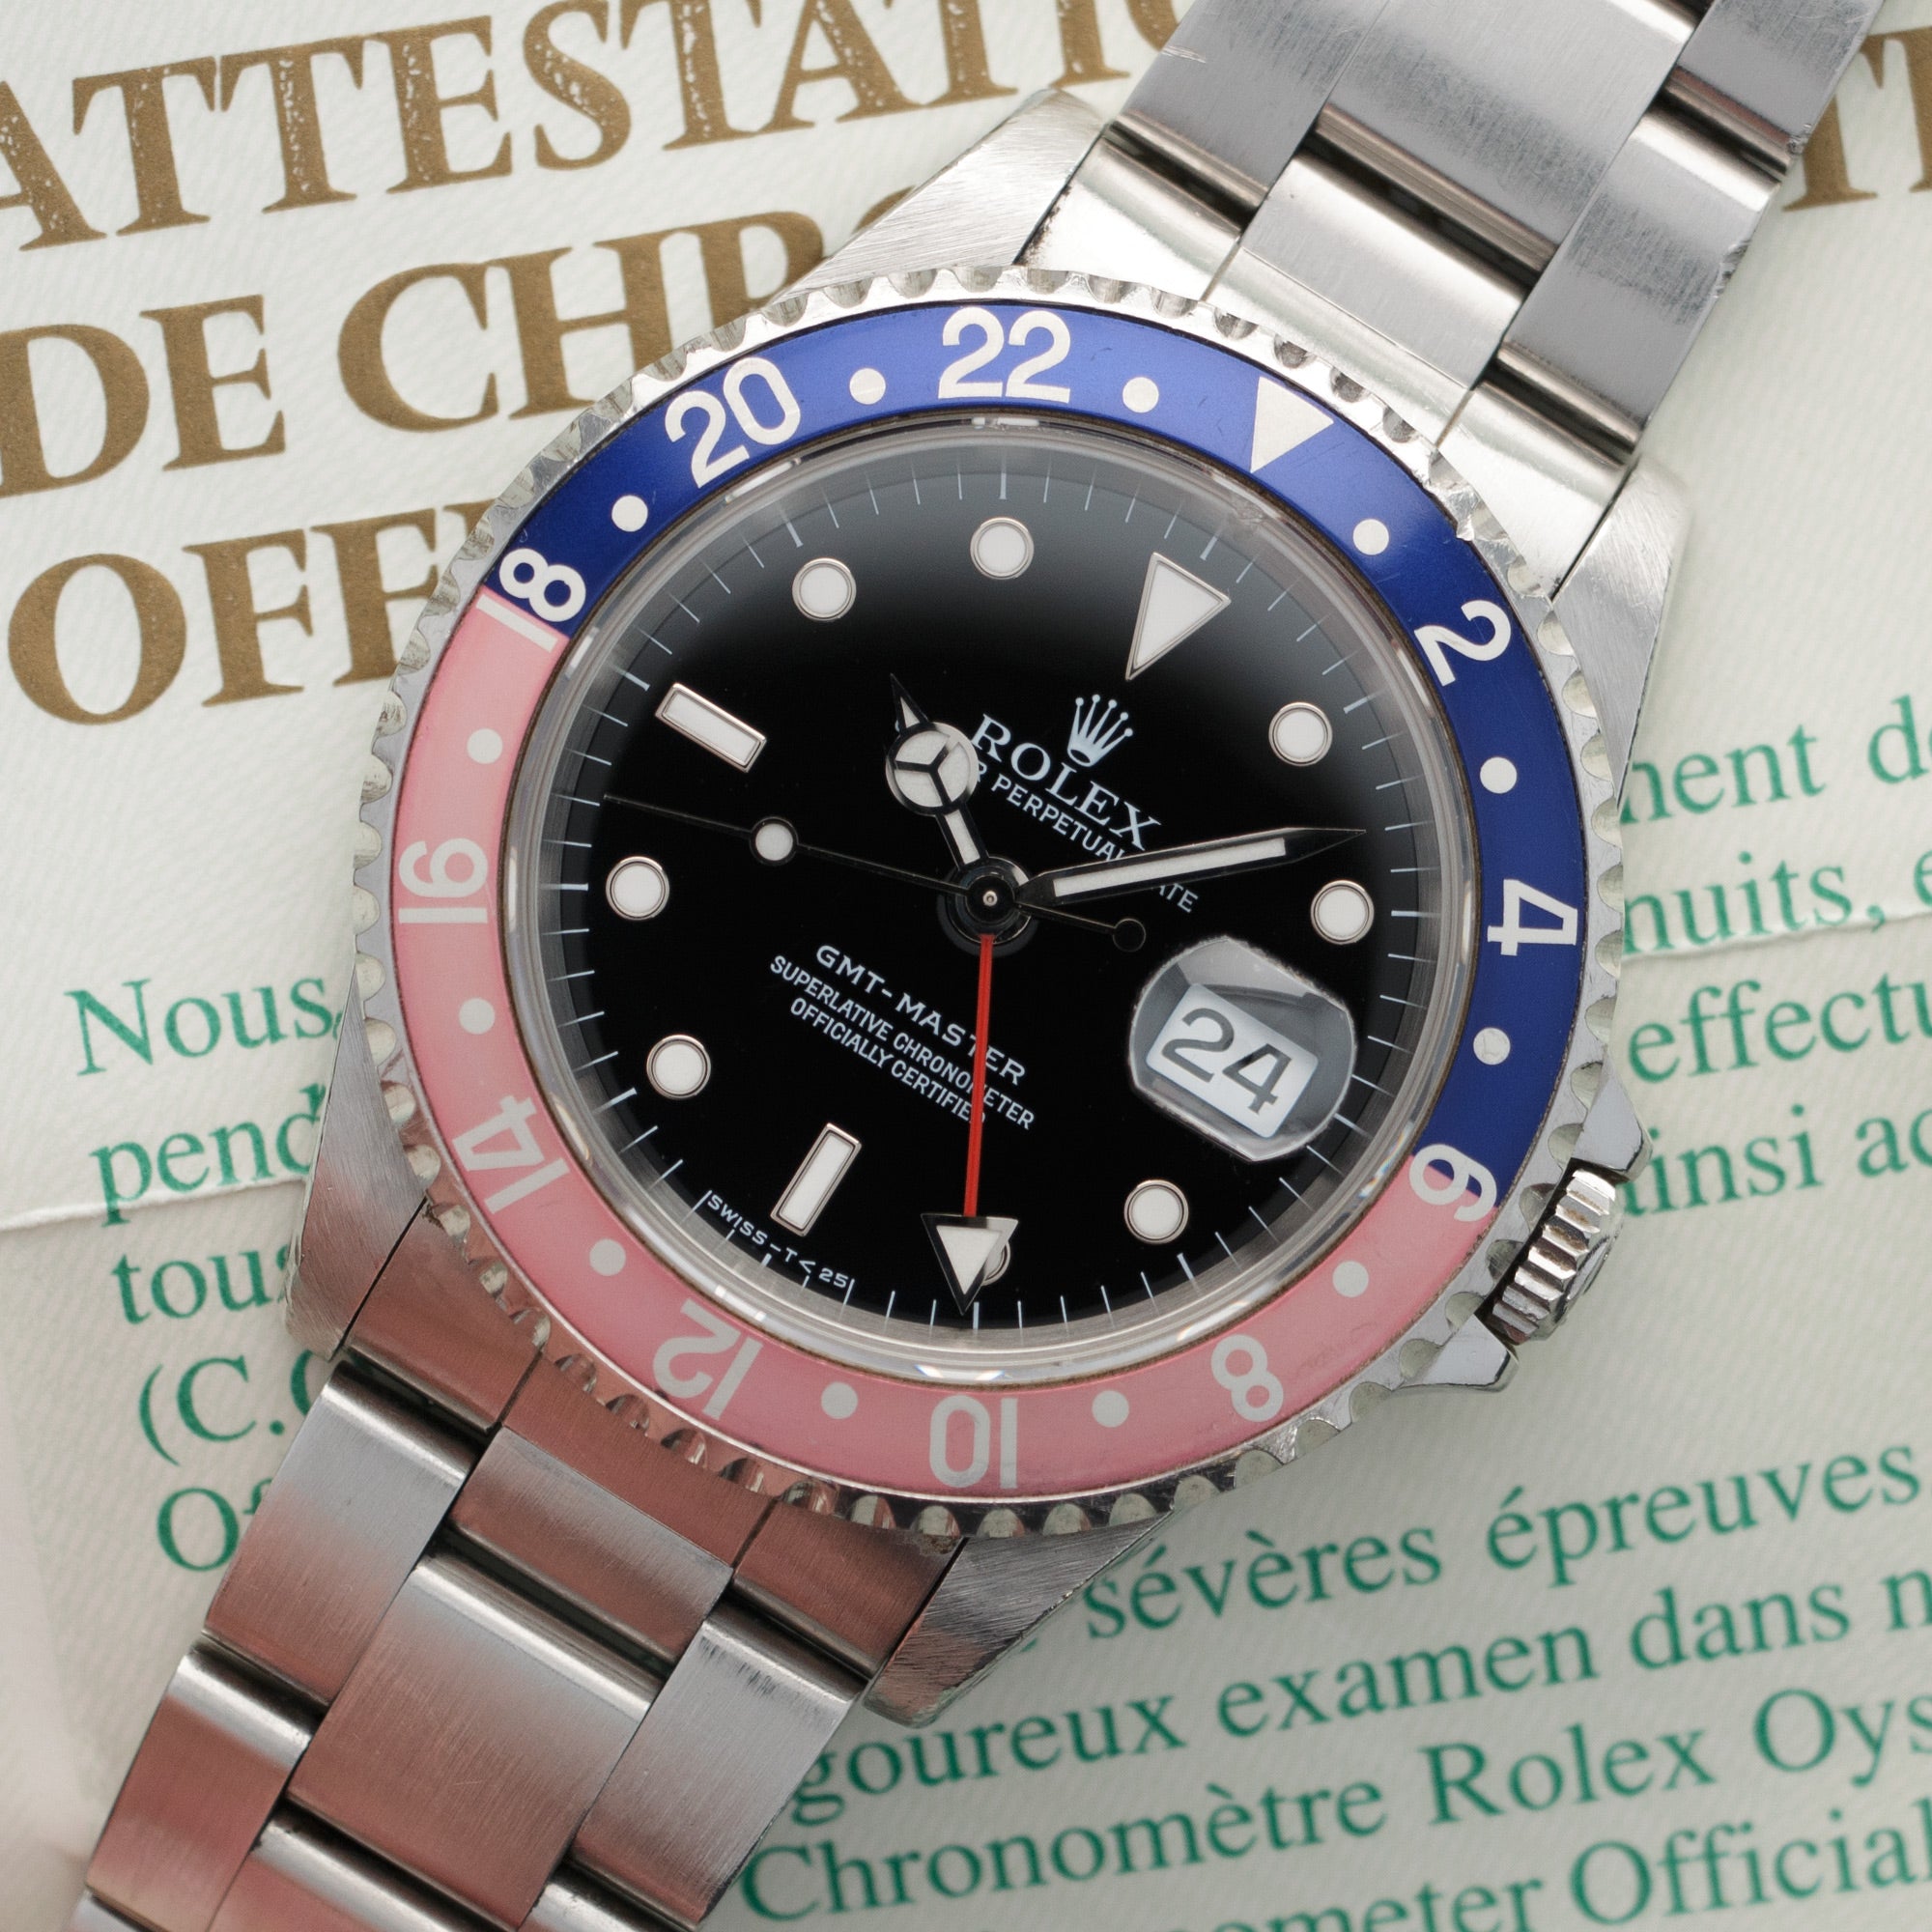 Rolex - Rolex GMT-Master Pepsi Watch Ref. 16700, with Original Papers - The Keystone Watches